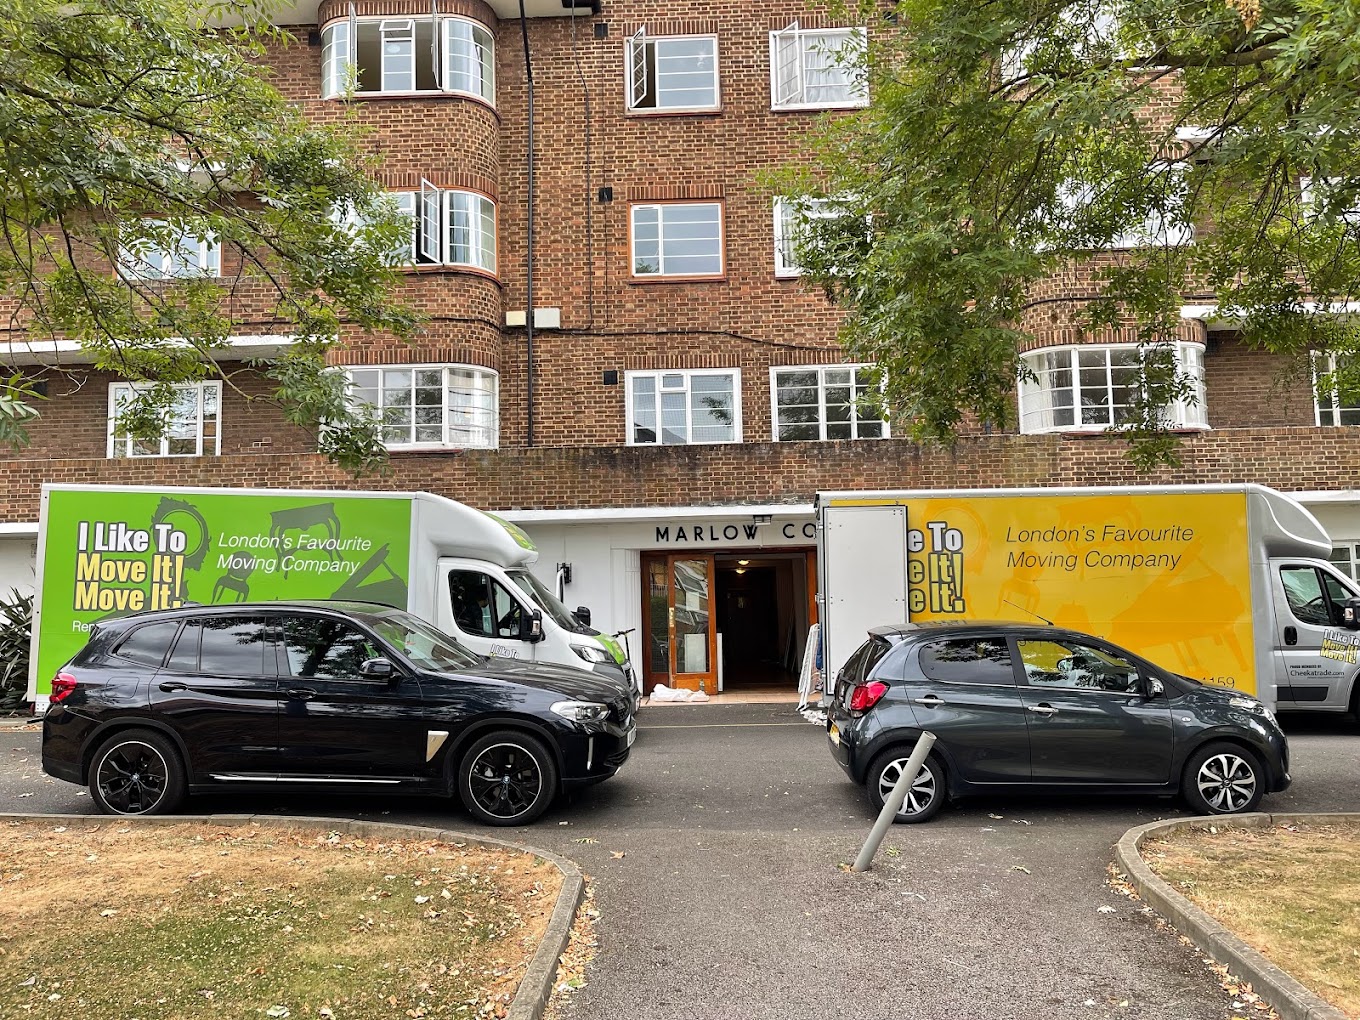 I Like To Move It Move It Removals - Finchley Best Moving Company in London